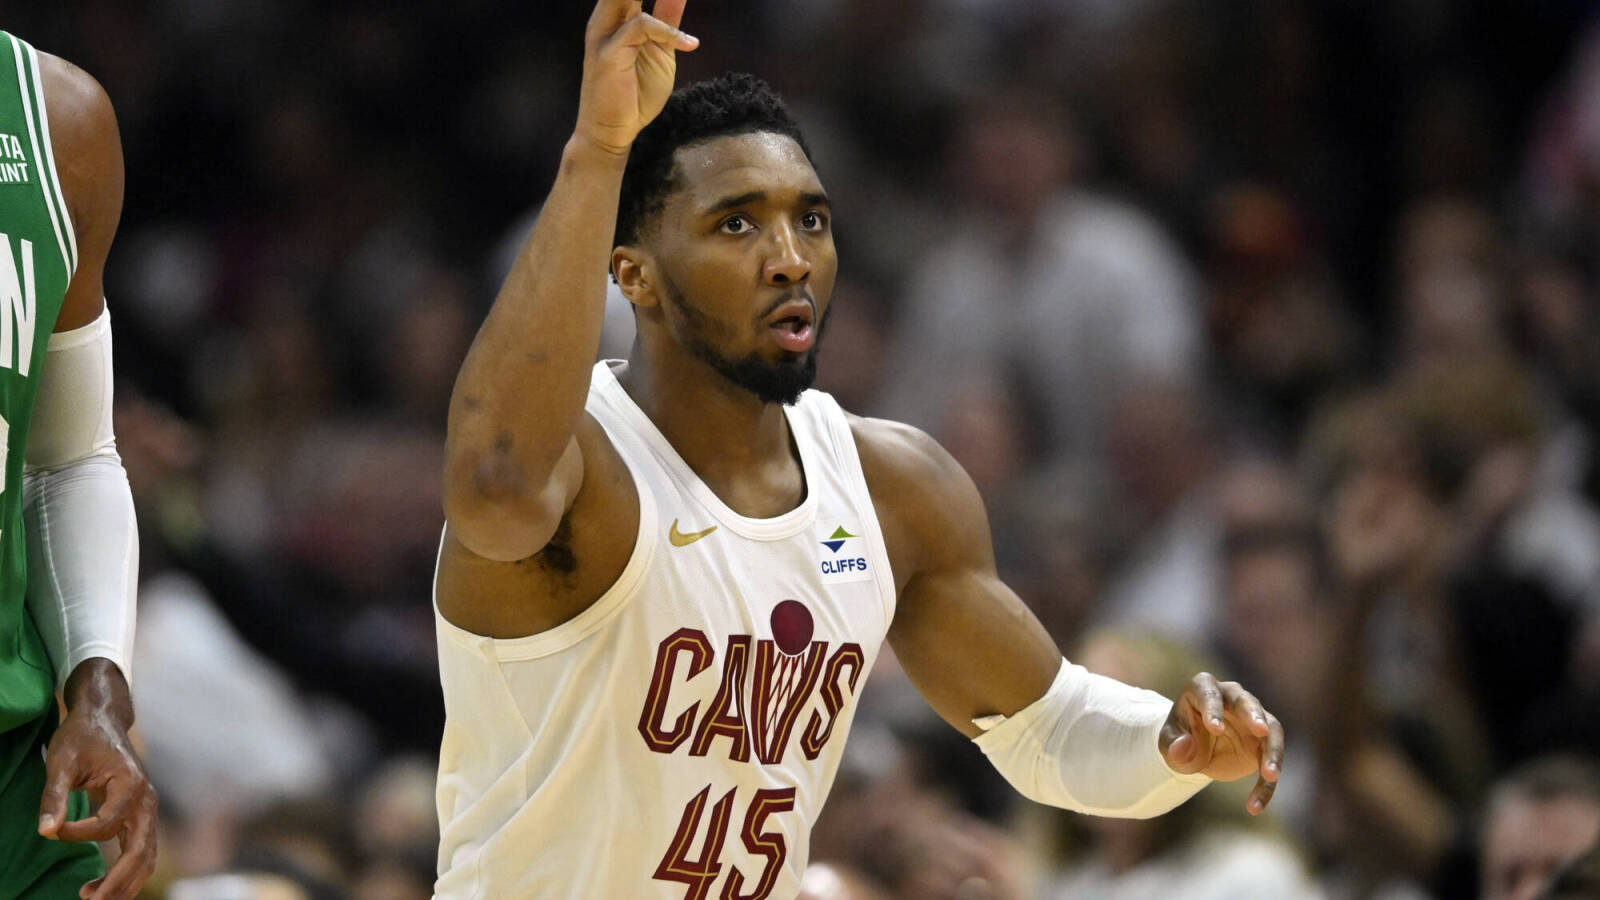 Watch: An outstanding first half by Donovan Mitchell keeps the Cavaliers alive in Game 3 vs. Celtics